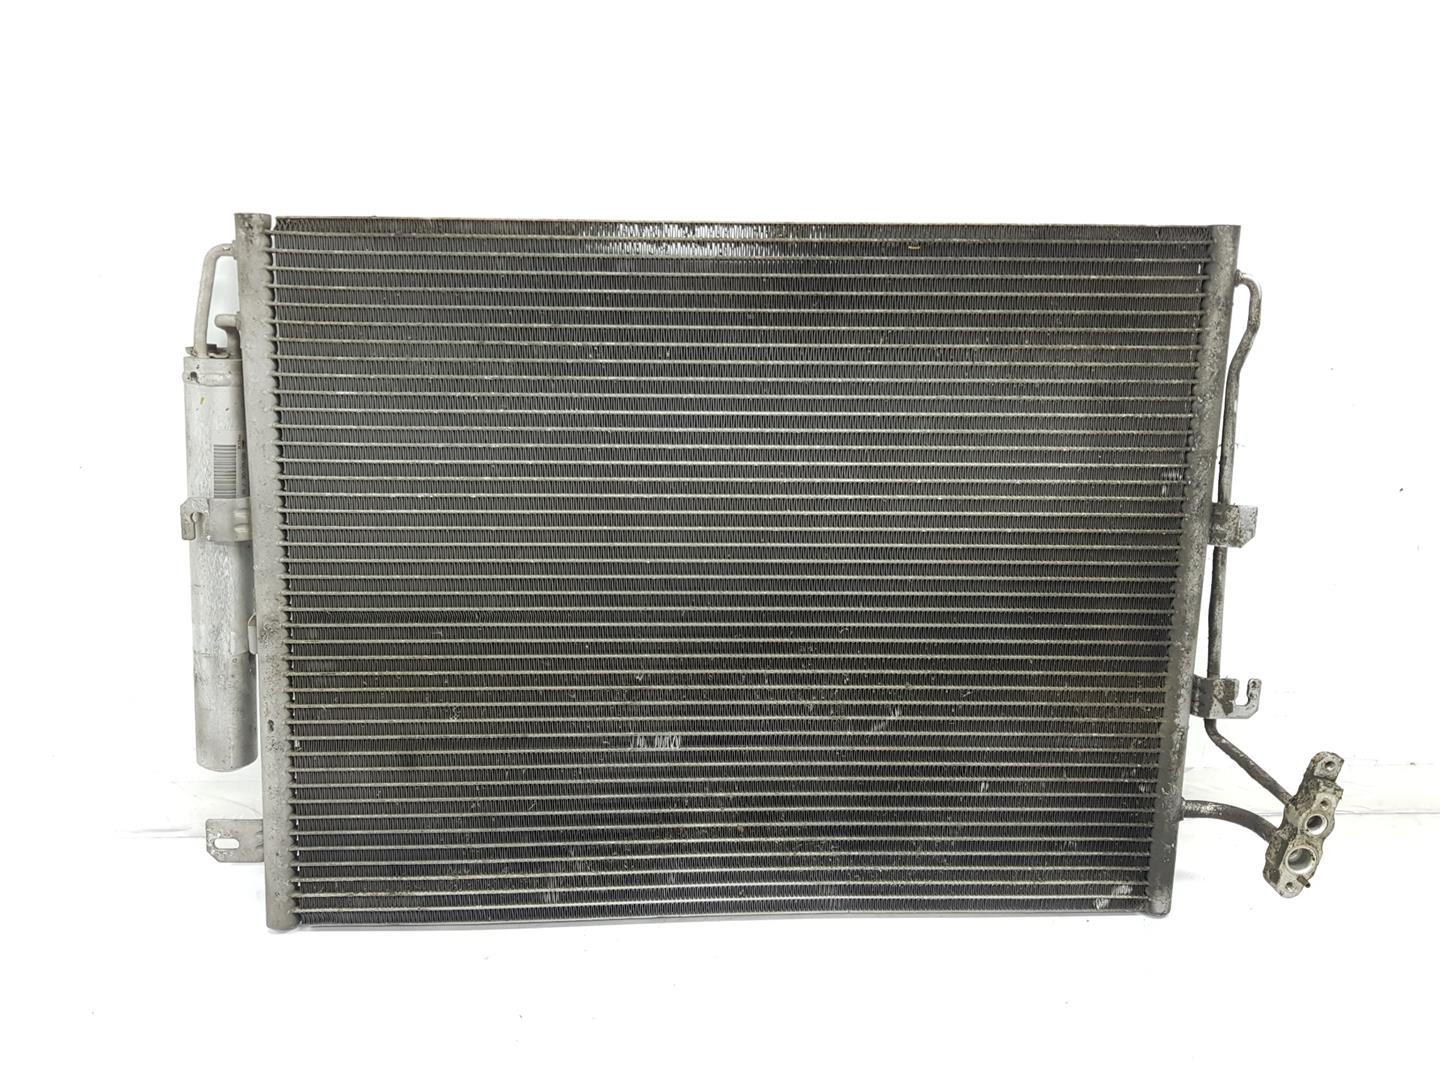 LAND ROVER Discovery 3 generation (2004-2009) Air Con Radiator LR018403, AH2219C600AB 24216720